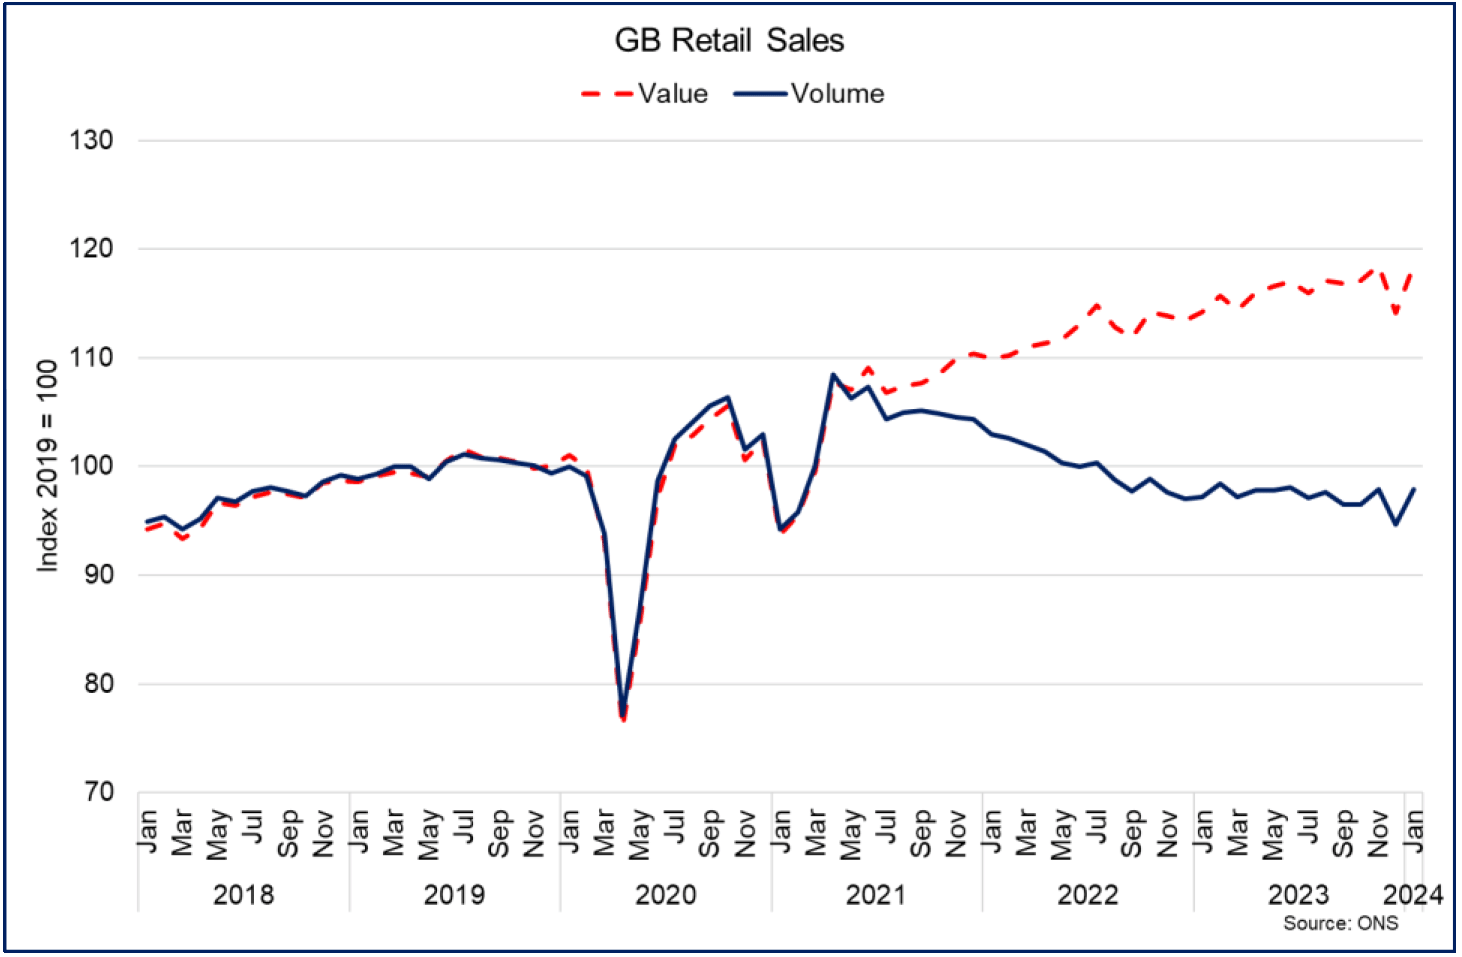 retail sales volumes rose 0.7% over the year to January 2023 however the value increased 3.8%